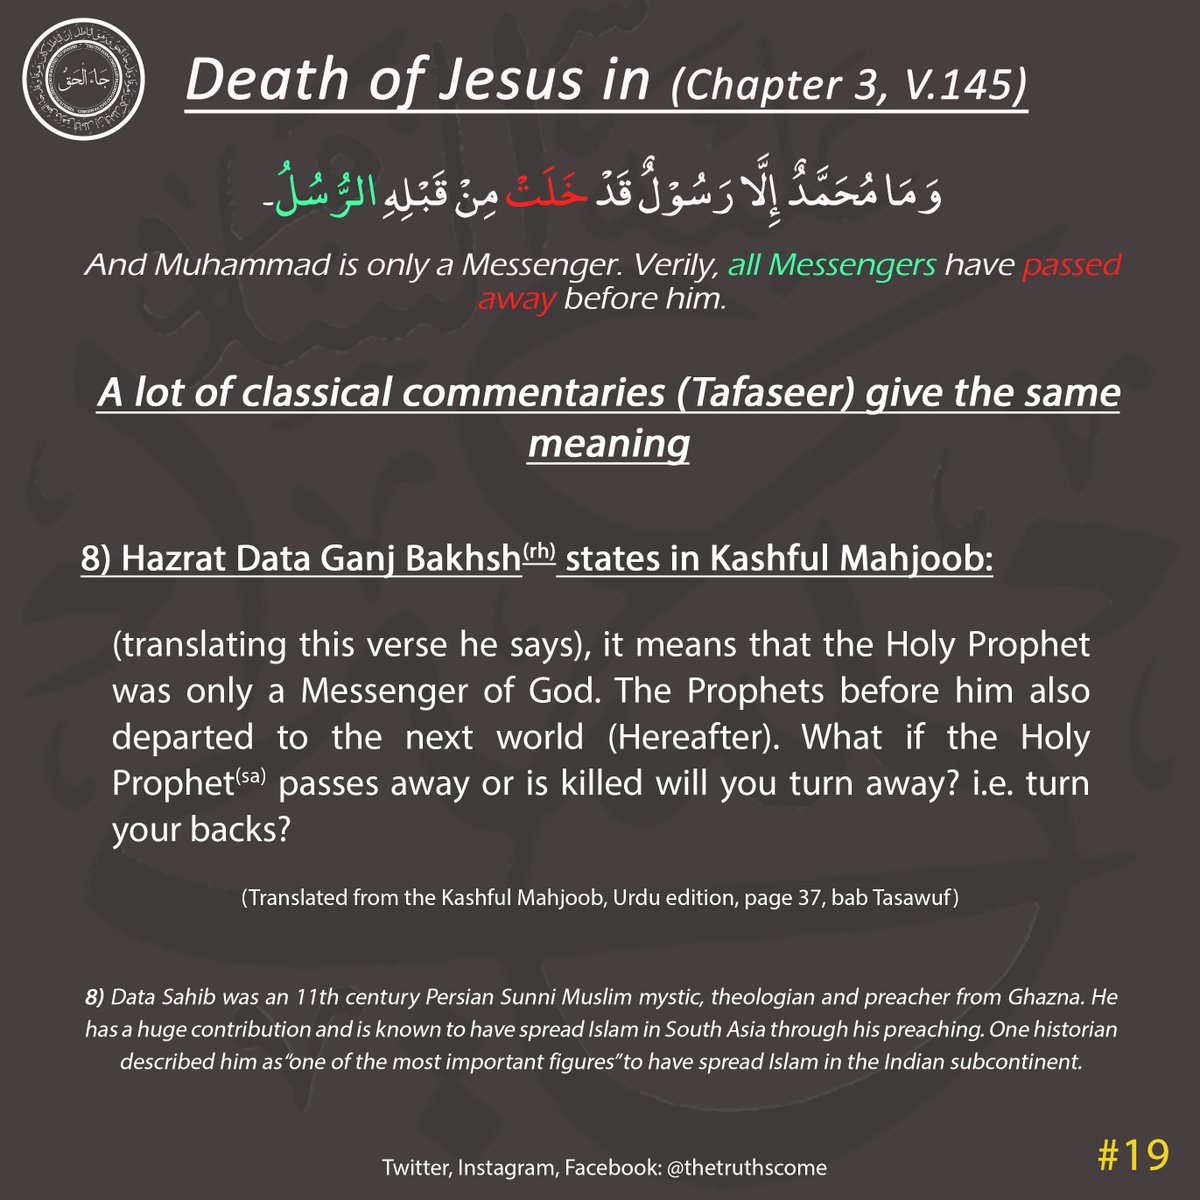 Tafsir-e-Kabir by Imam Razi & Kashful Mahjoob (Unveiling of the hidden) by Data Ganj Baksh give also the same meaning by mentioning the death of all Prophets before the Holy Prophet(sa) and no one was excluded.